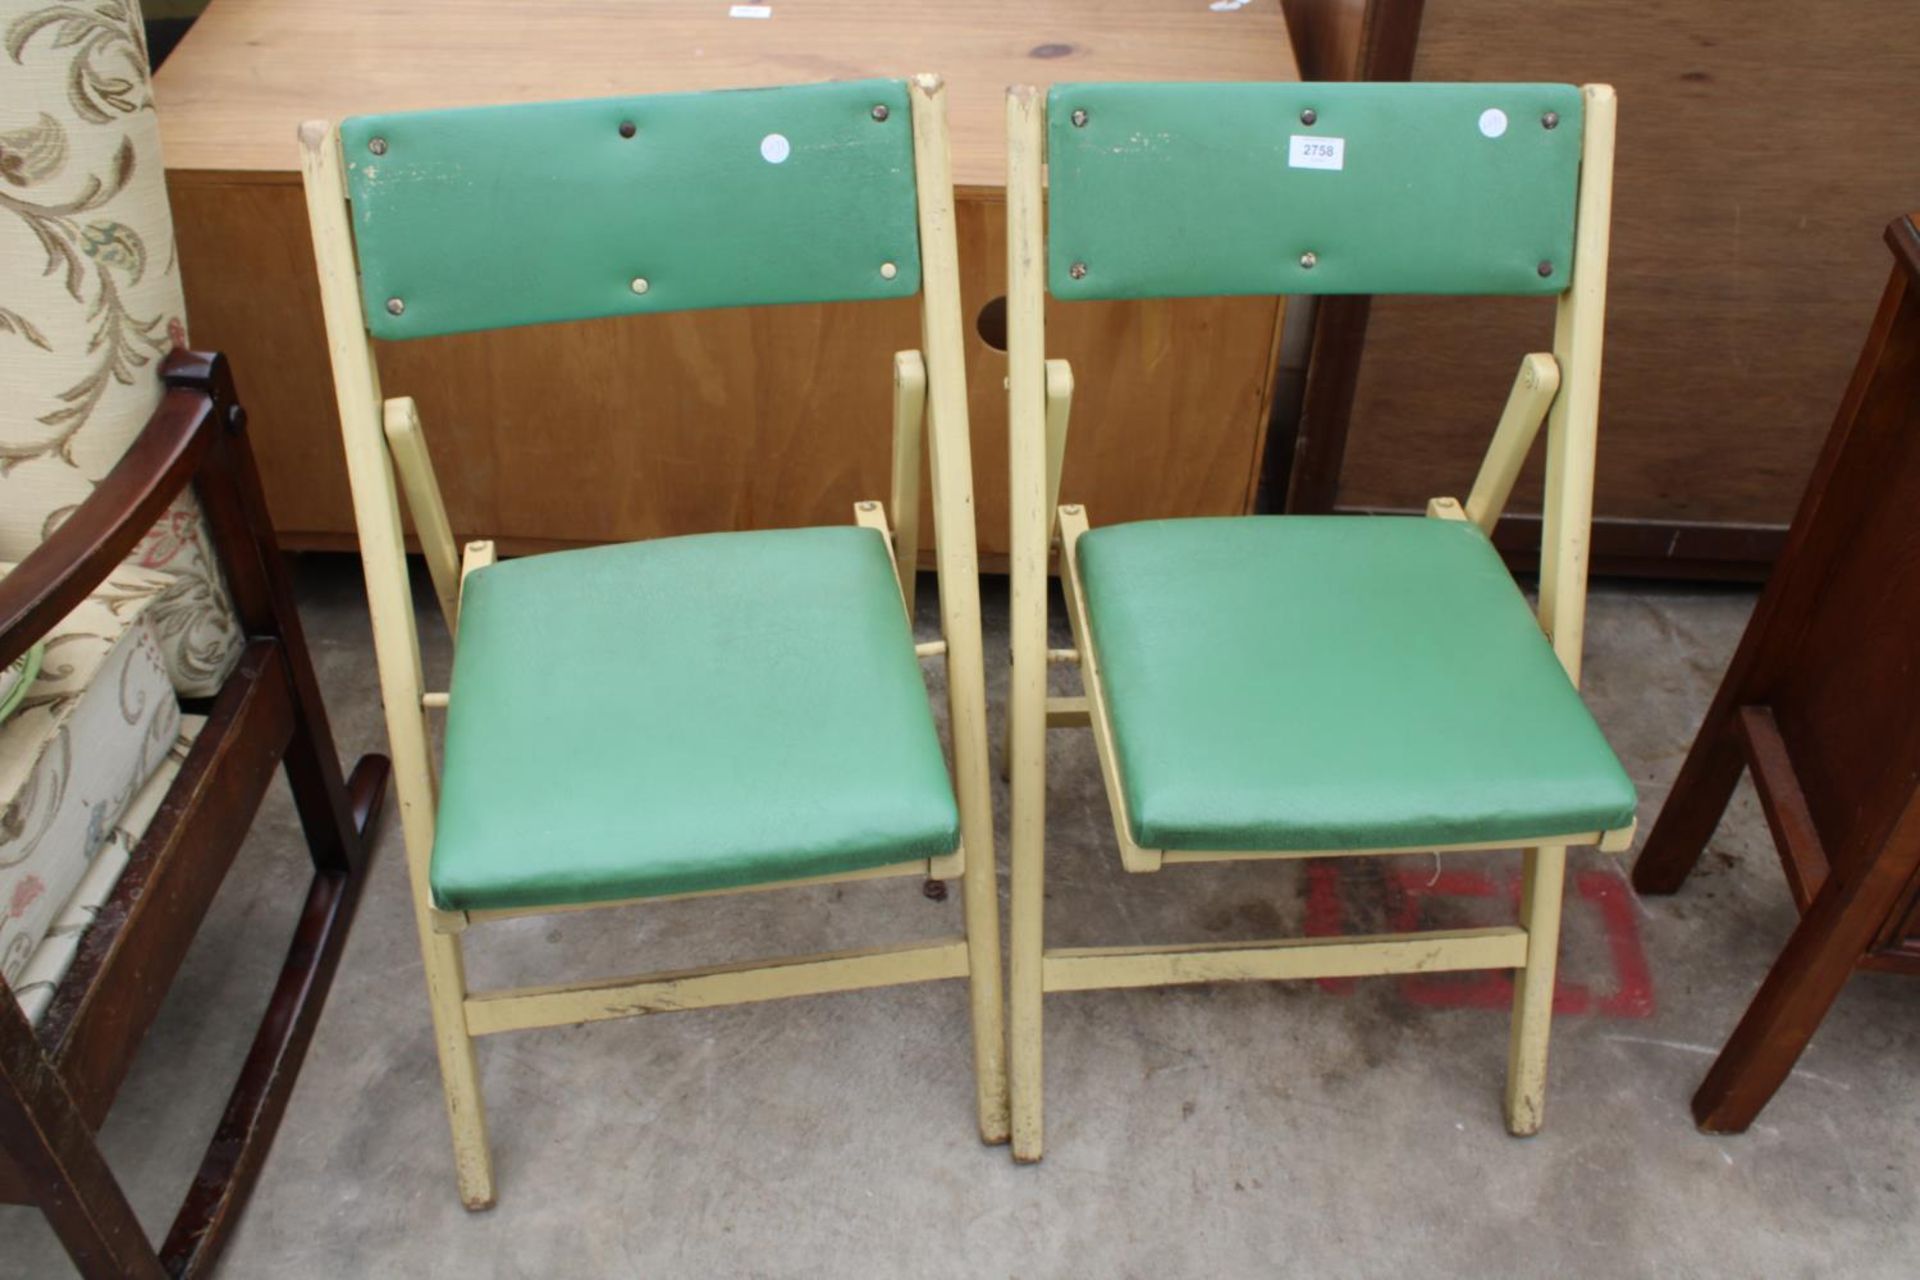 A PAIR OF 1950'S PAINTED FOLDING CHAIRS